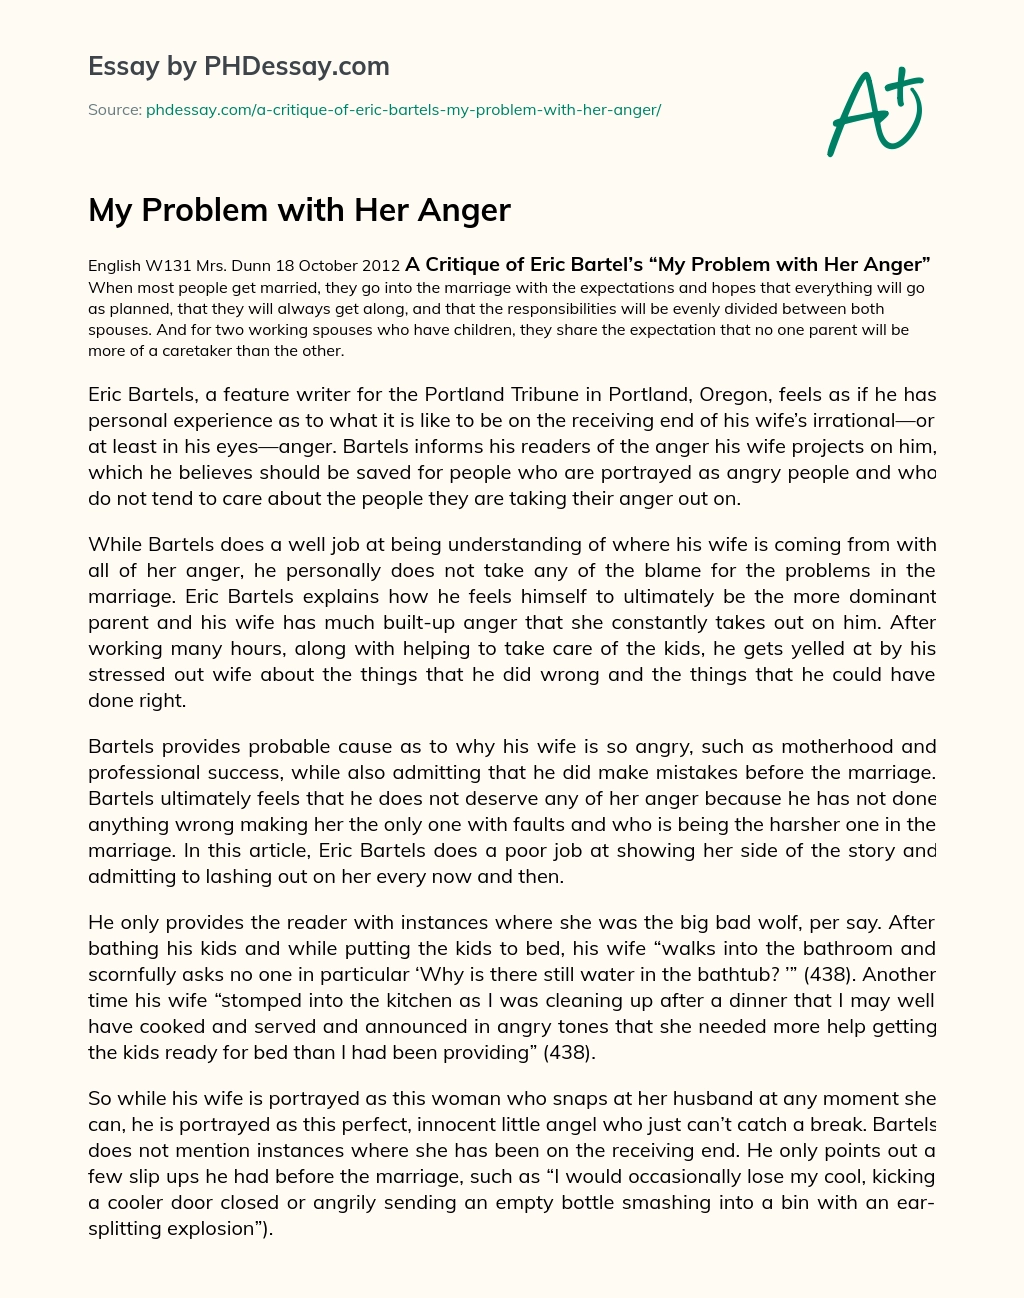 My Problem with Her Anger essay